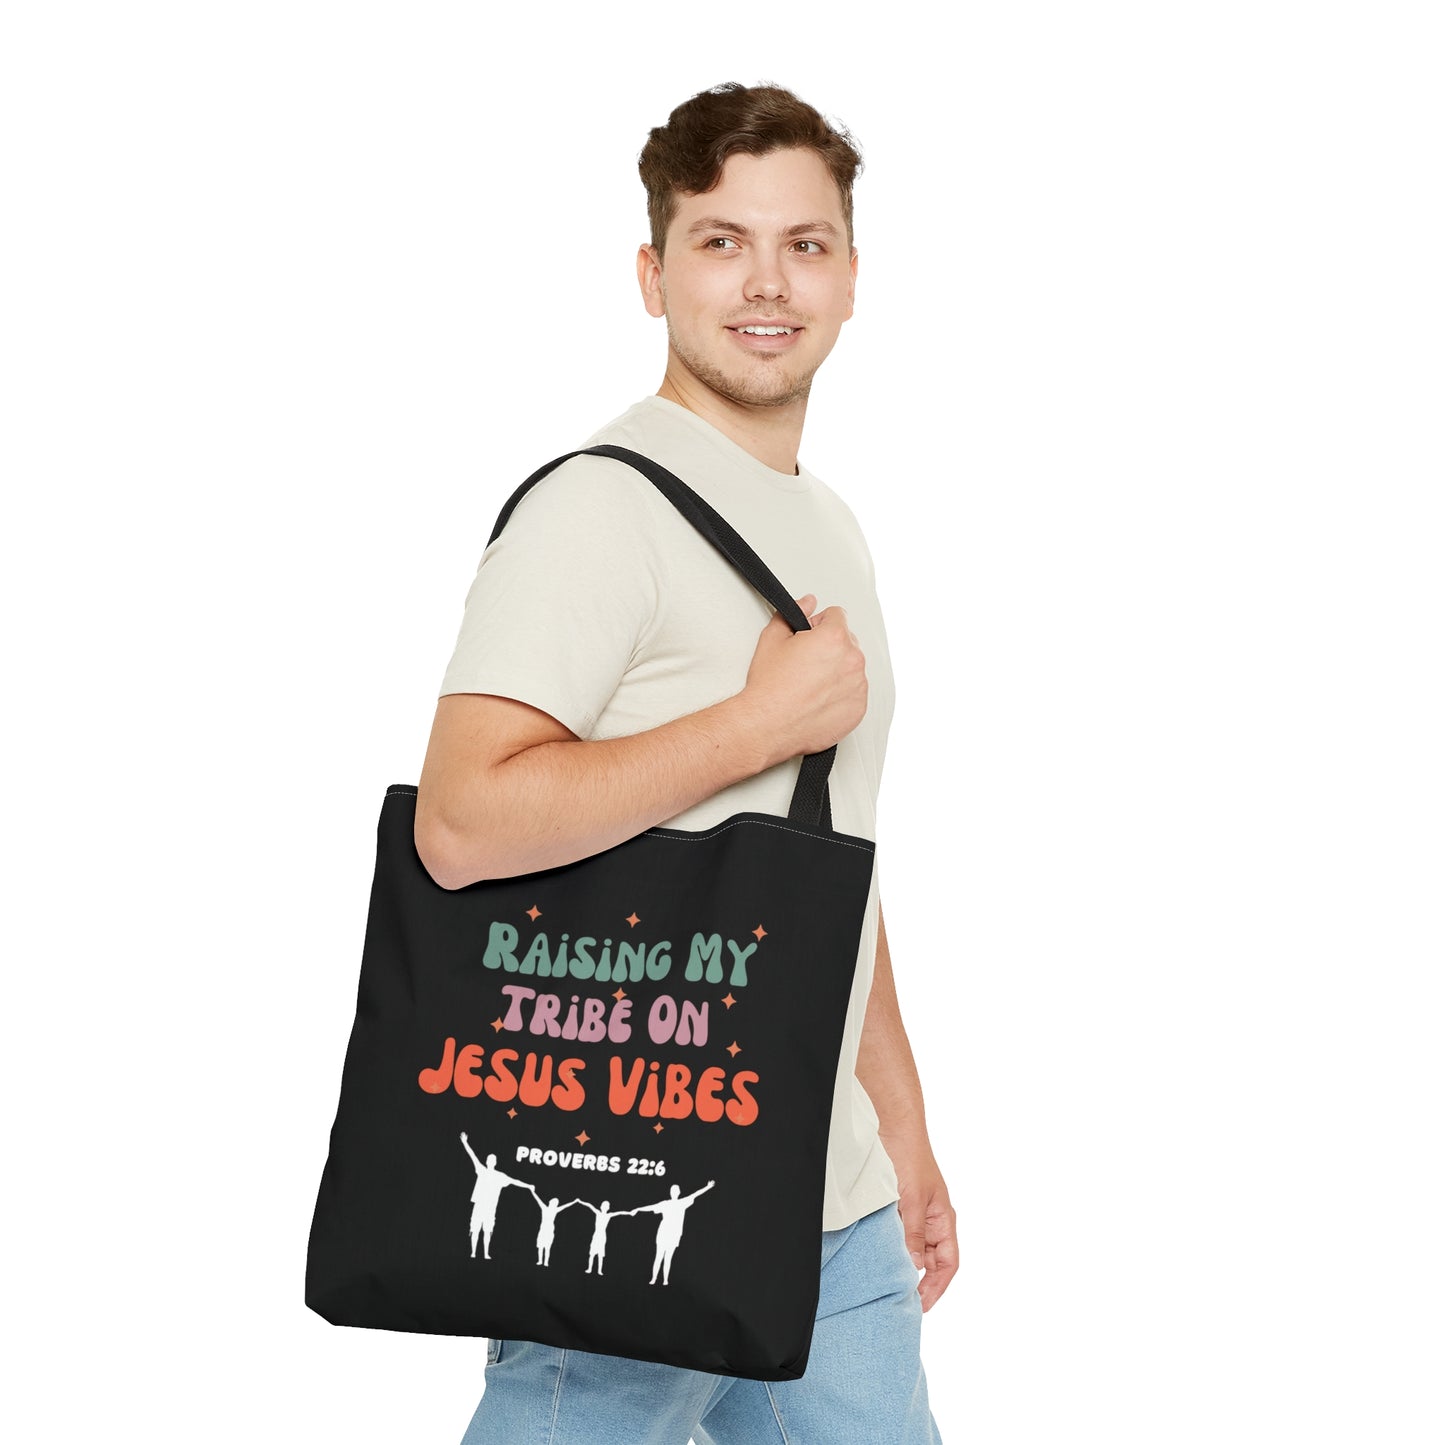 Proverbs 22:6 Raising My Tribe On Jesus Vibes Christian Tote Bag